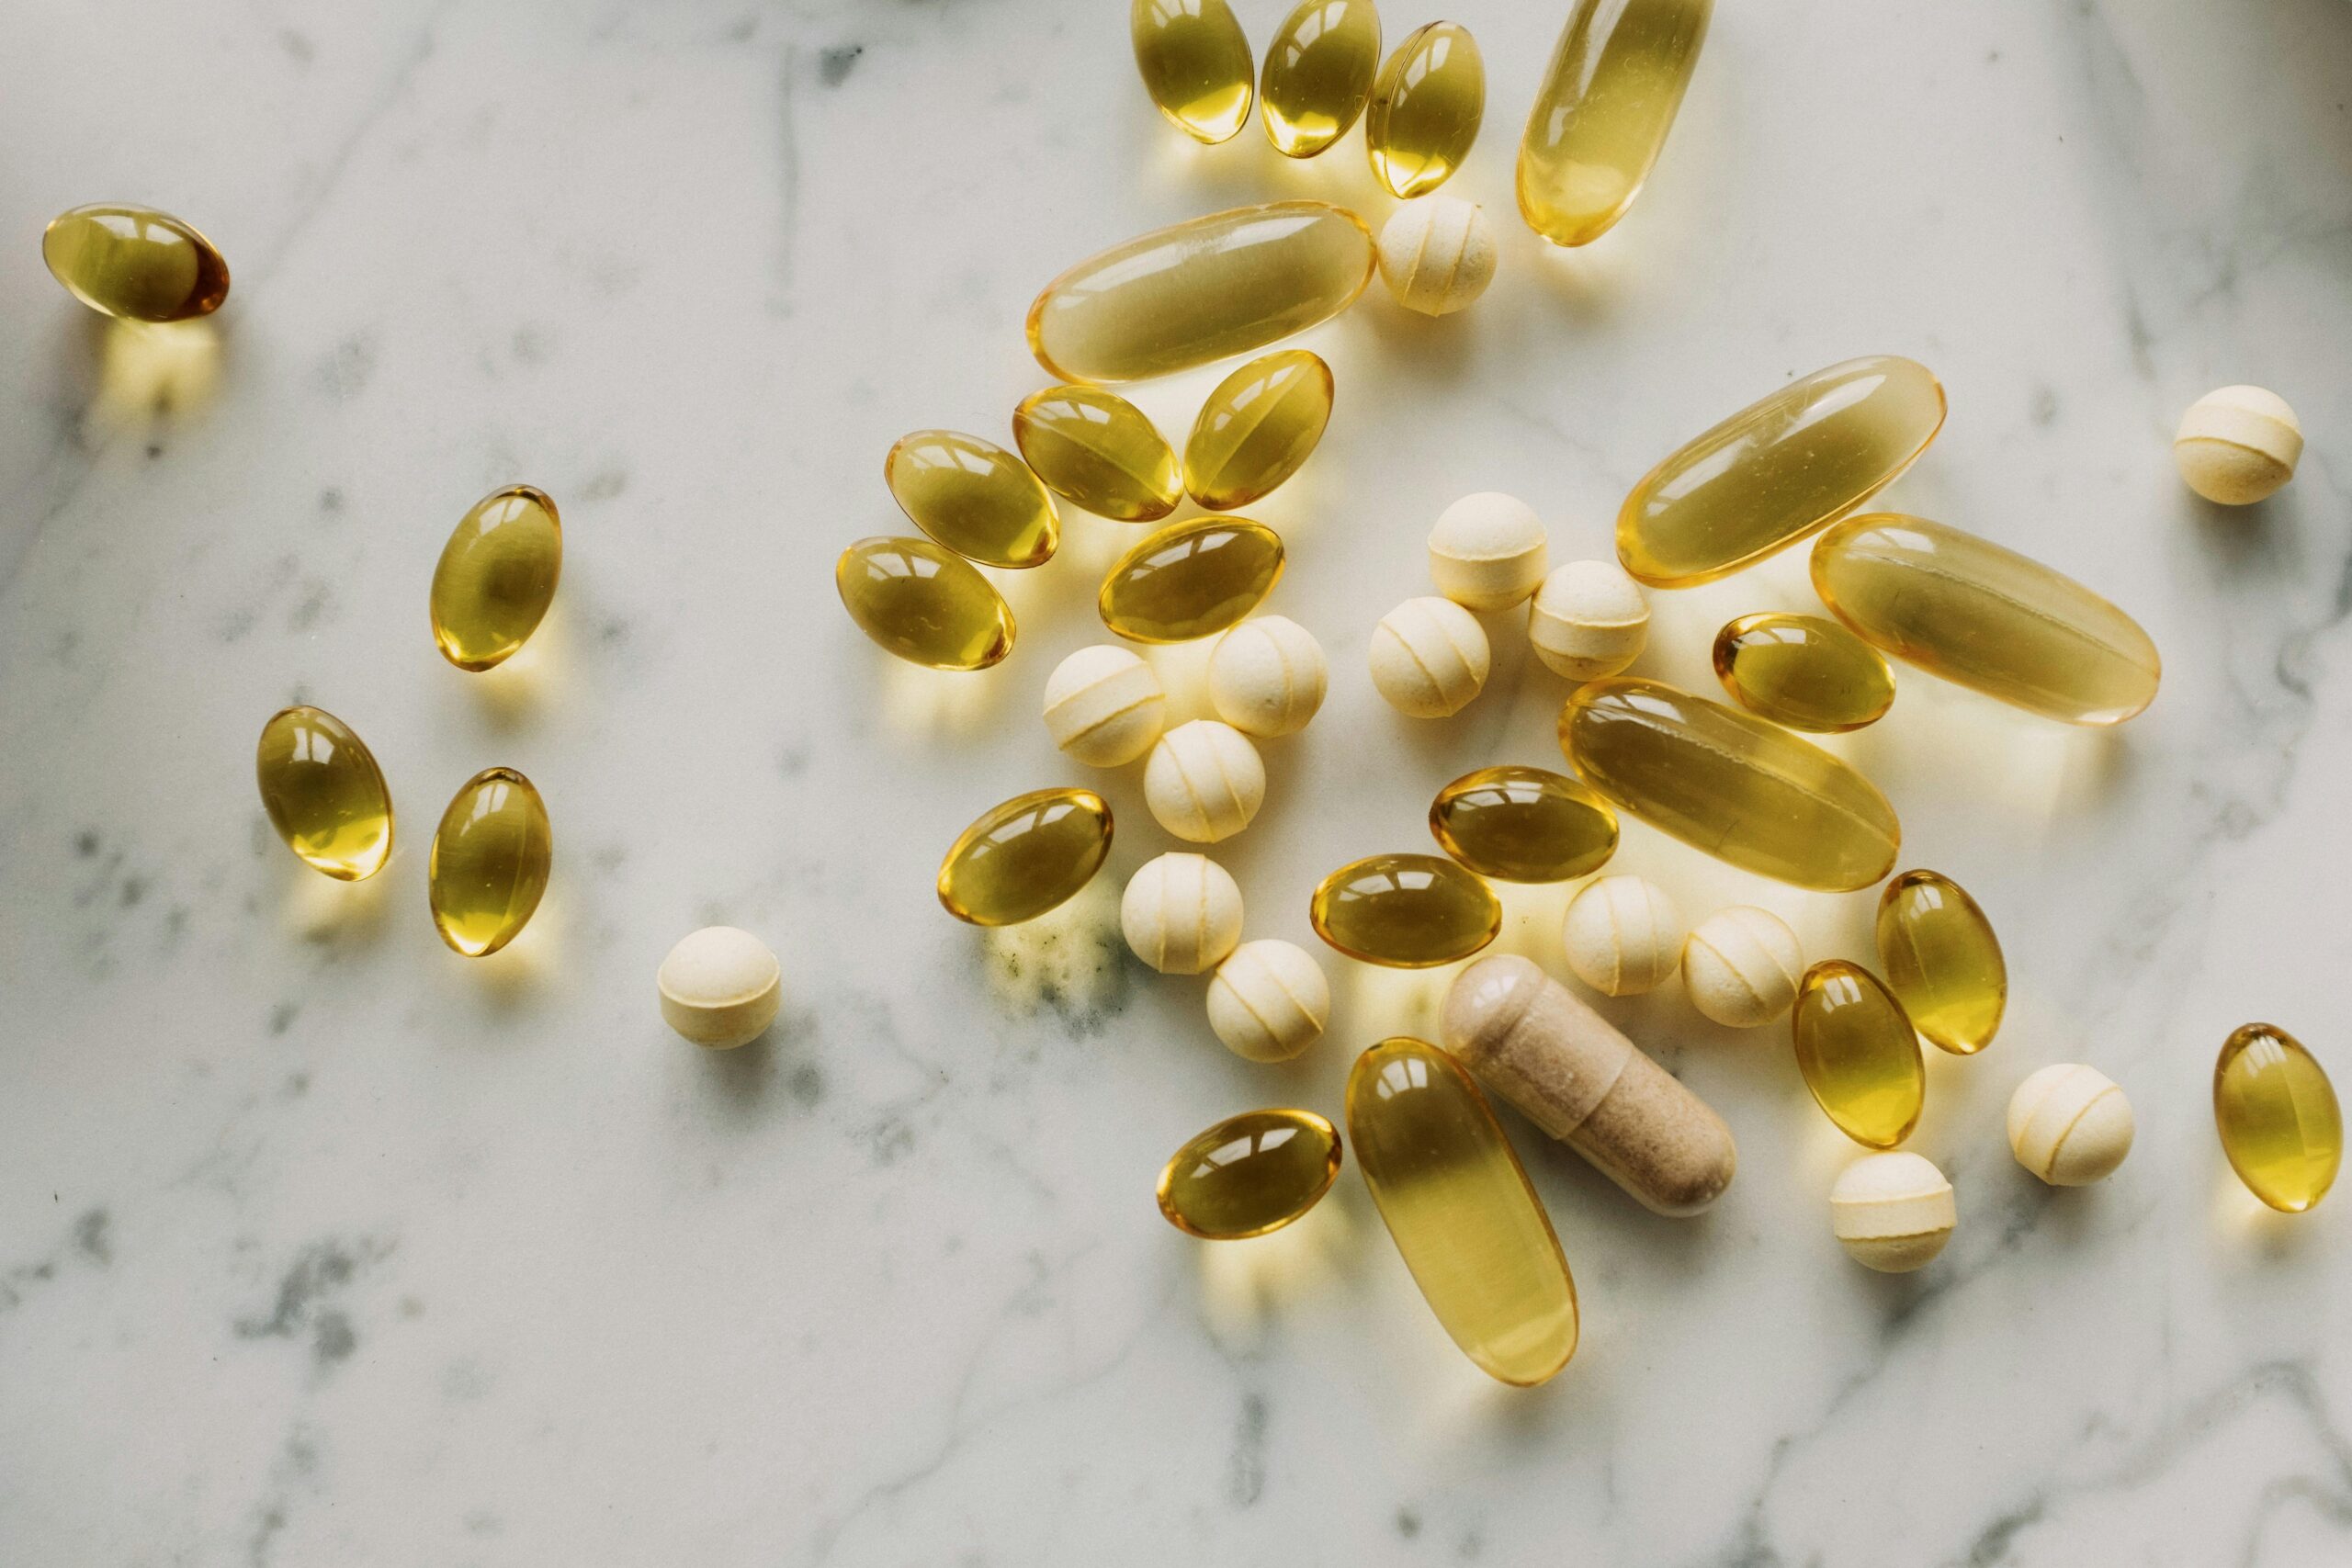 omega 3 supplements in capsules